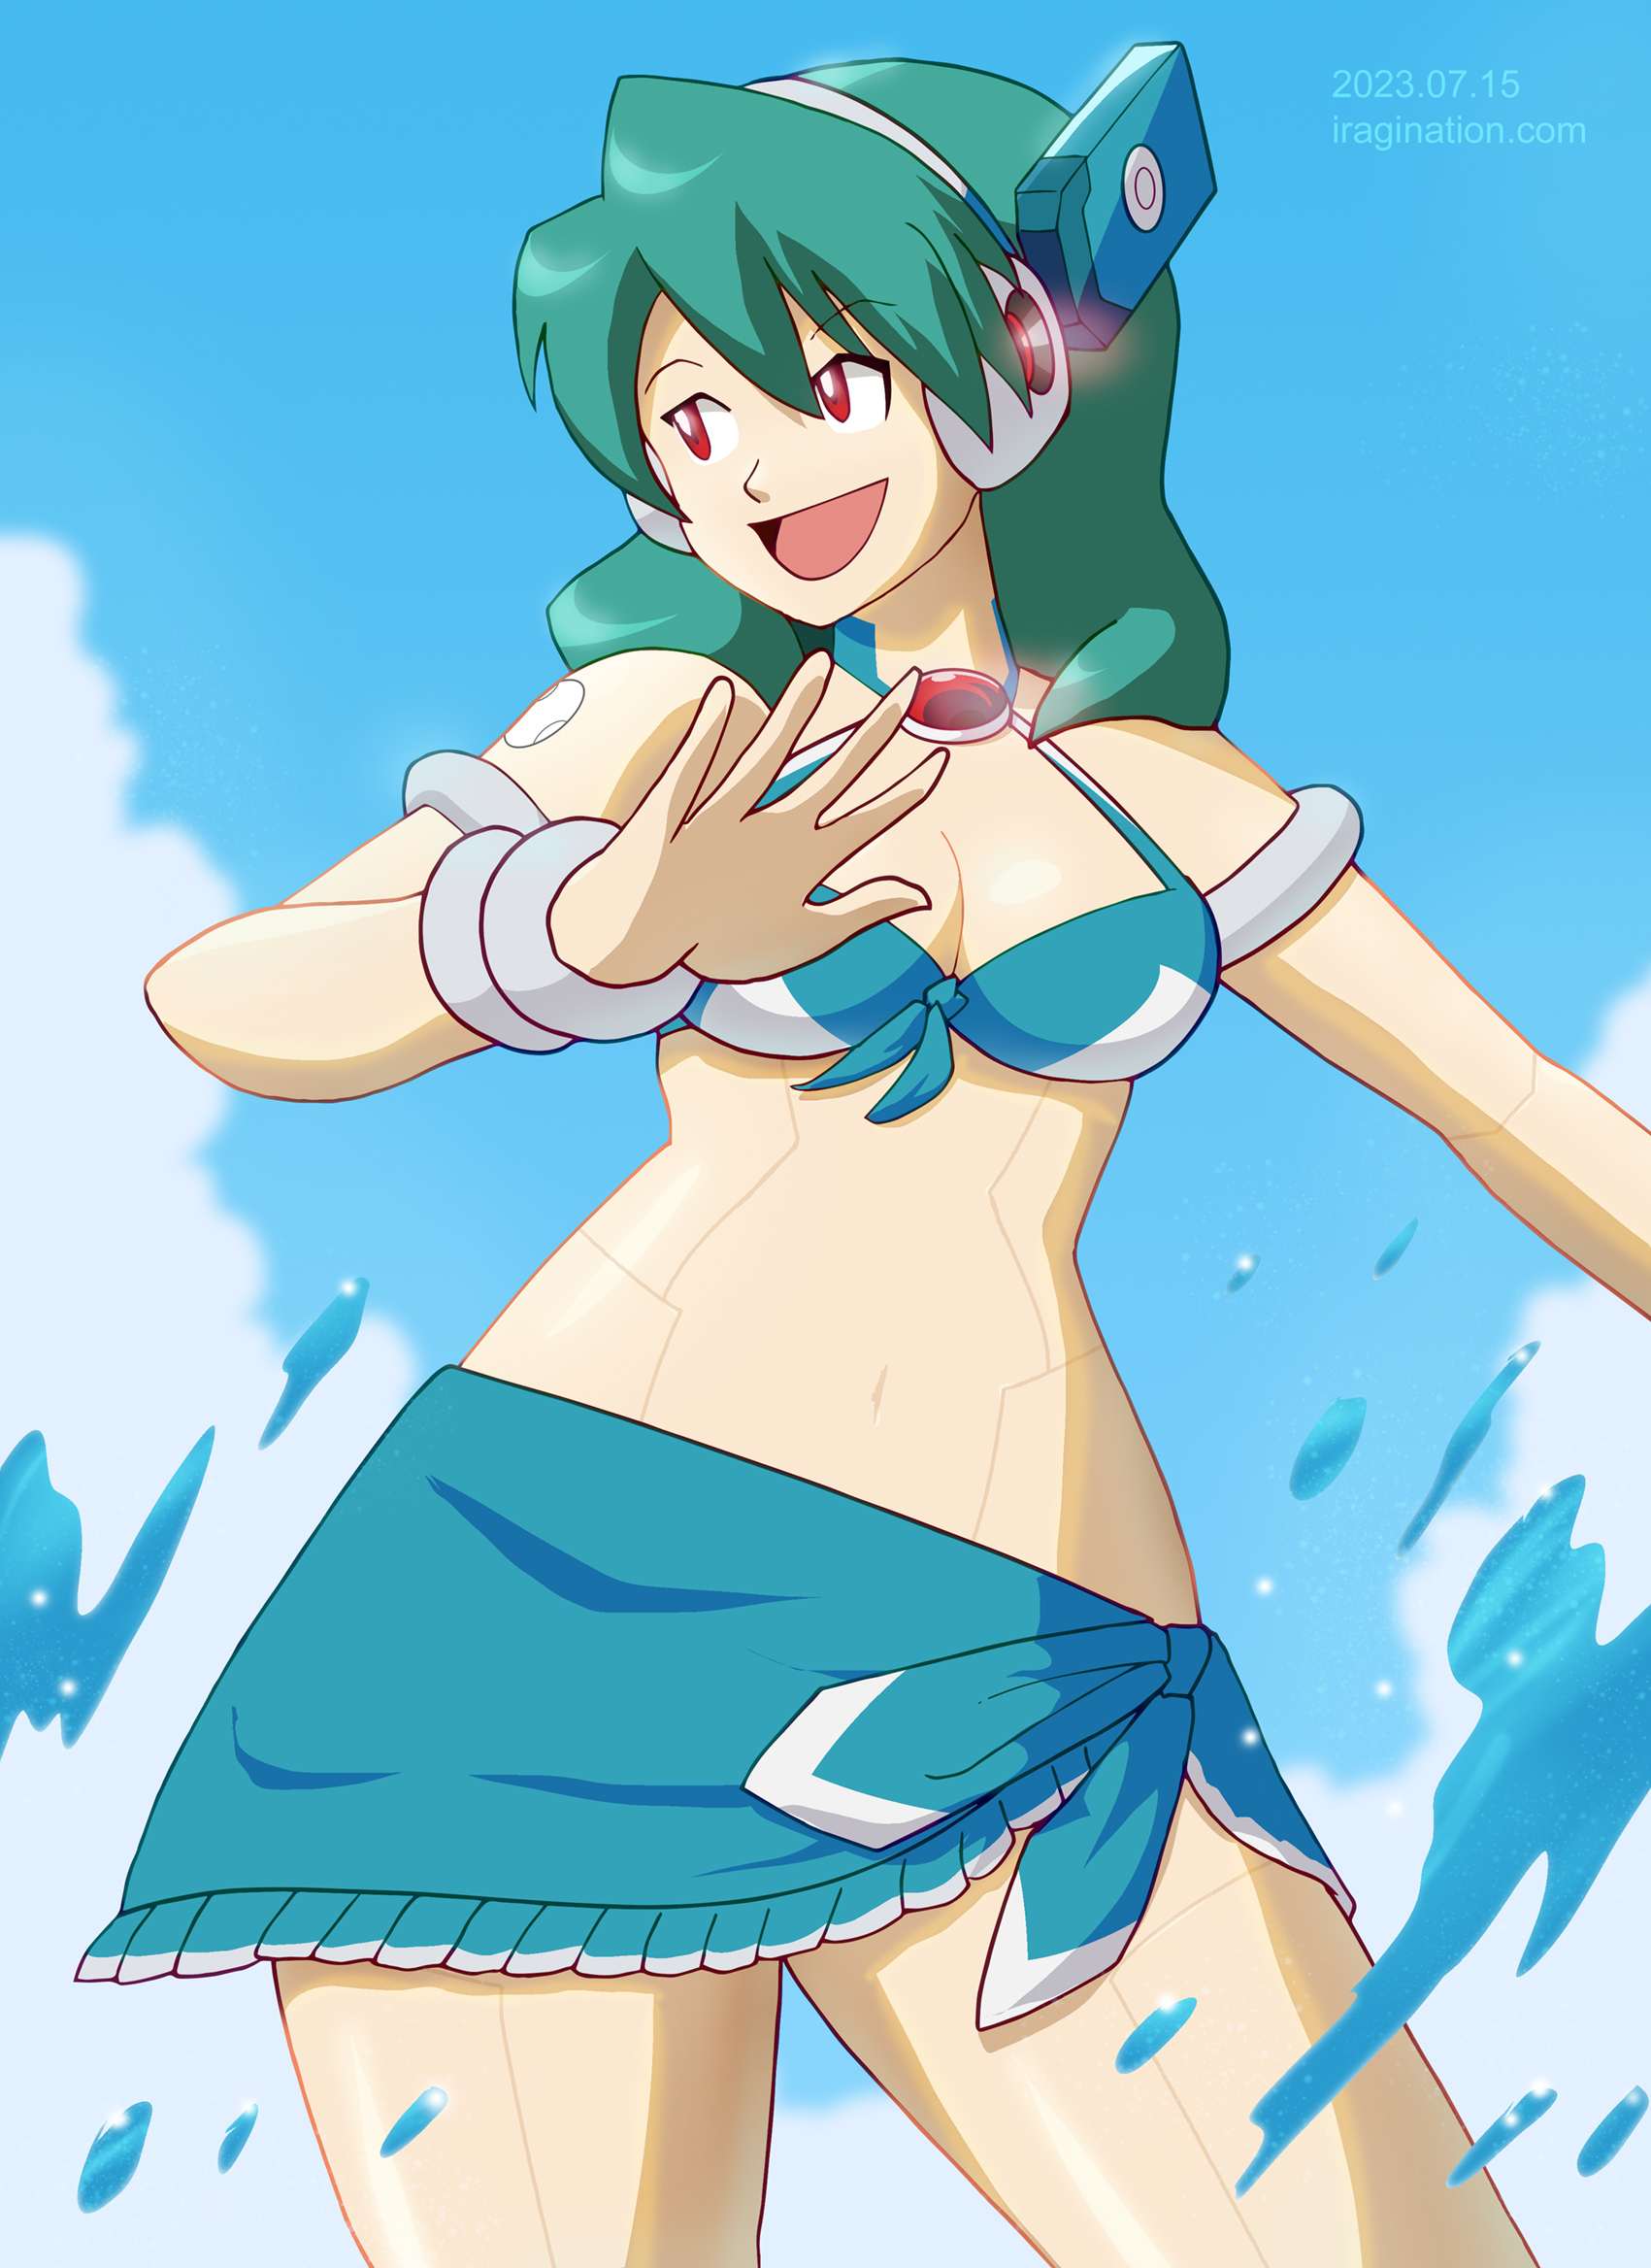 Swimsuit Alia (Azur)
Back in 2021, [b]Megaman X DiVE[/b] released the skin [url=https://www.facebook.com/CAPCOM.RXD/posts/694822597880499/]Swimsuit Alia (Azur)[/url] as a limited reward for the revival of the [b]Summer Vacation for Lord of Snowy Plain[/b] event.

I don’t remember the details, but the condition to get the reward was to get among the top 100 players of the event. I am always amazed by the level of dedication some of these modern games expect from the players. It is okay if you want to make your consumer engagement study, but not at the expense of your player’s sanity. If you expect a player base in the range of several thousand at worst, this is going to require a lot of resources even from a dedicated player. There was no way I would have time to participate so I skipped the trouble.

Fast forward to 2023 and they quietly released the skin on one of the recent summer revival events. And I just played my normal routine to get it. No crazy conditions. So now I have it! I guess a little patience pays off.

Mega Man X DiVE © CAPCOM
Keywords: alia